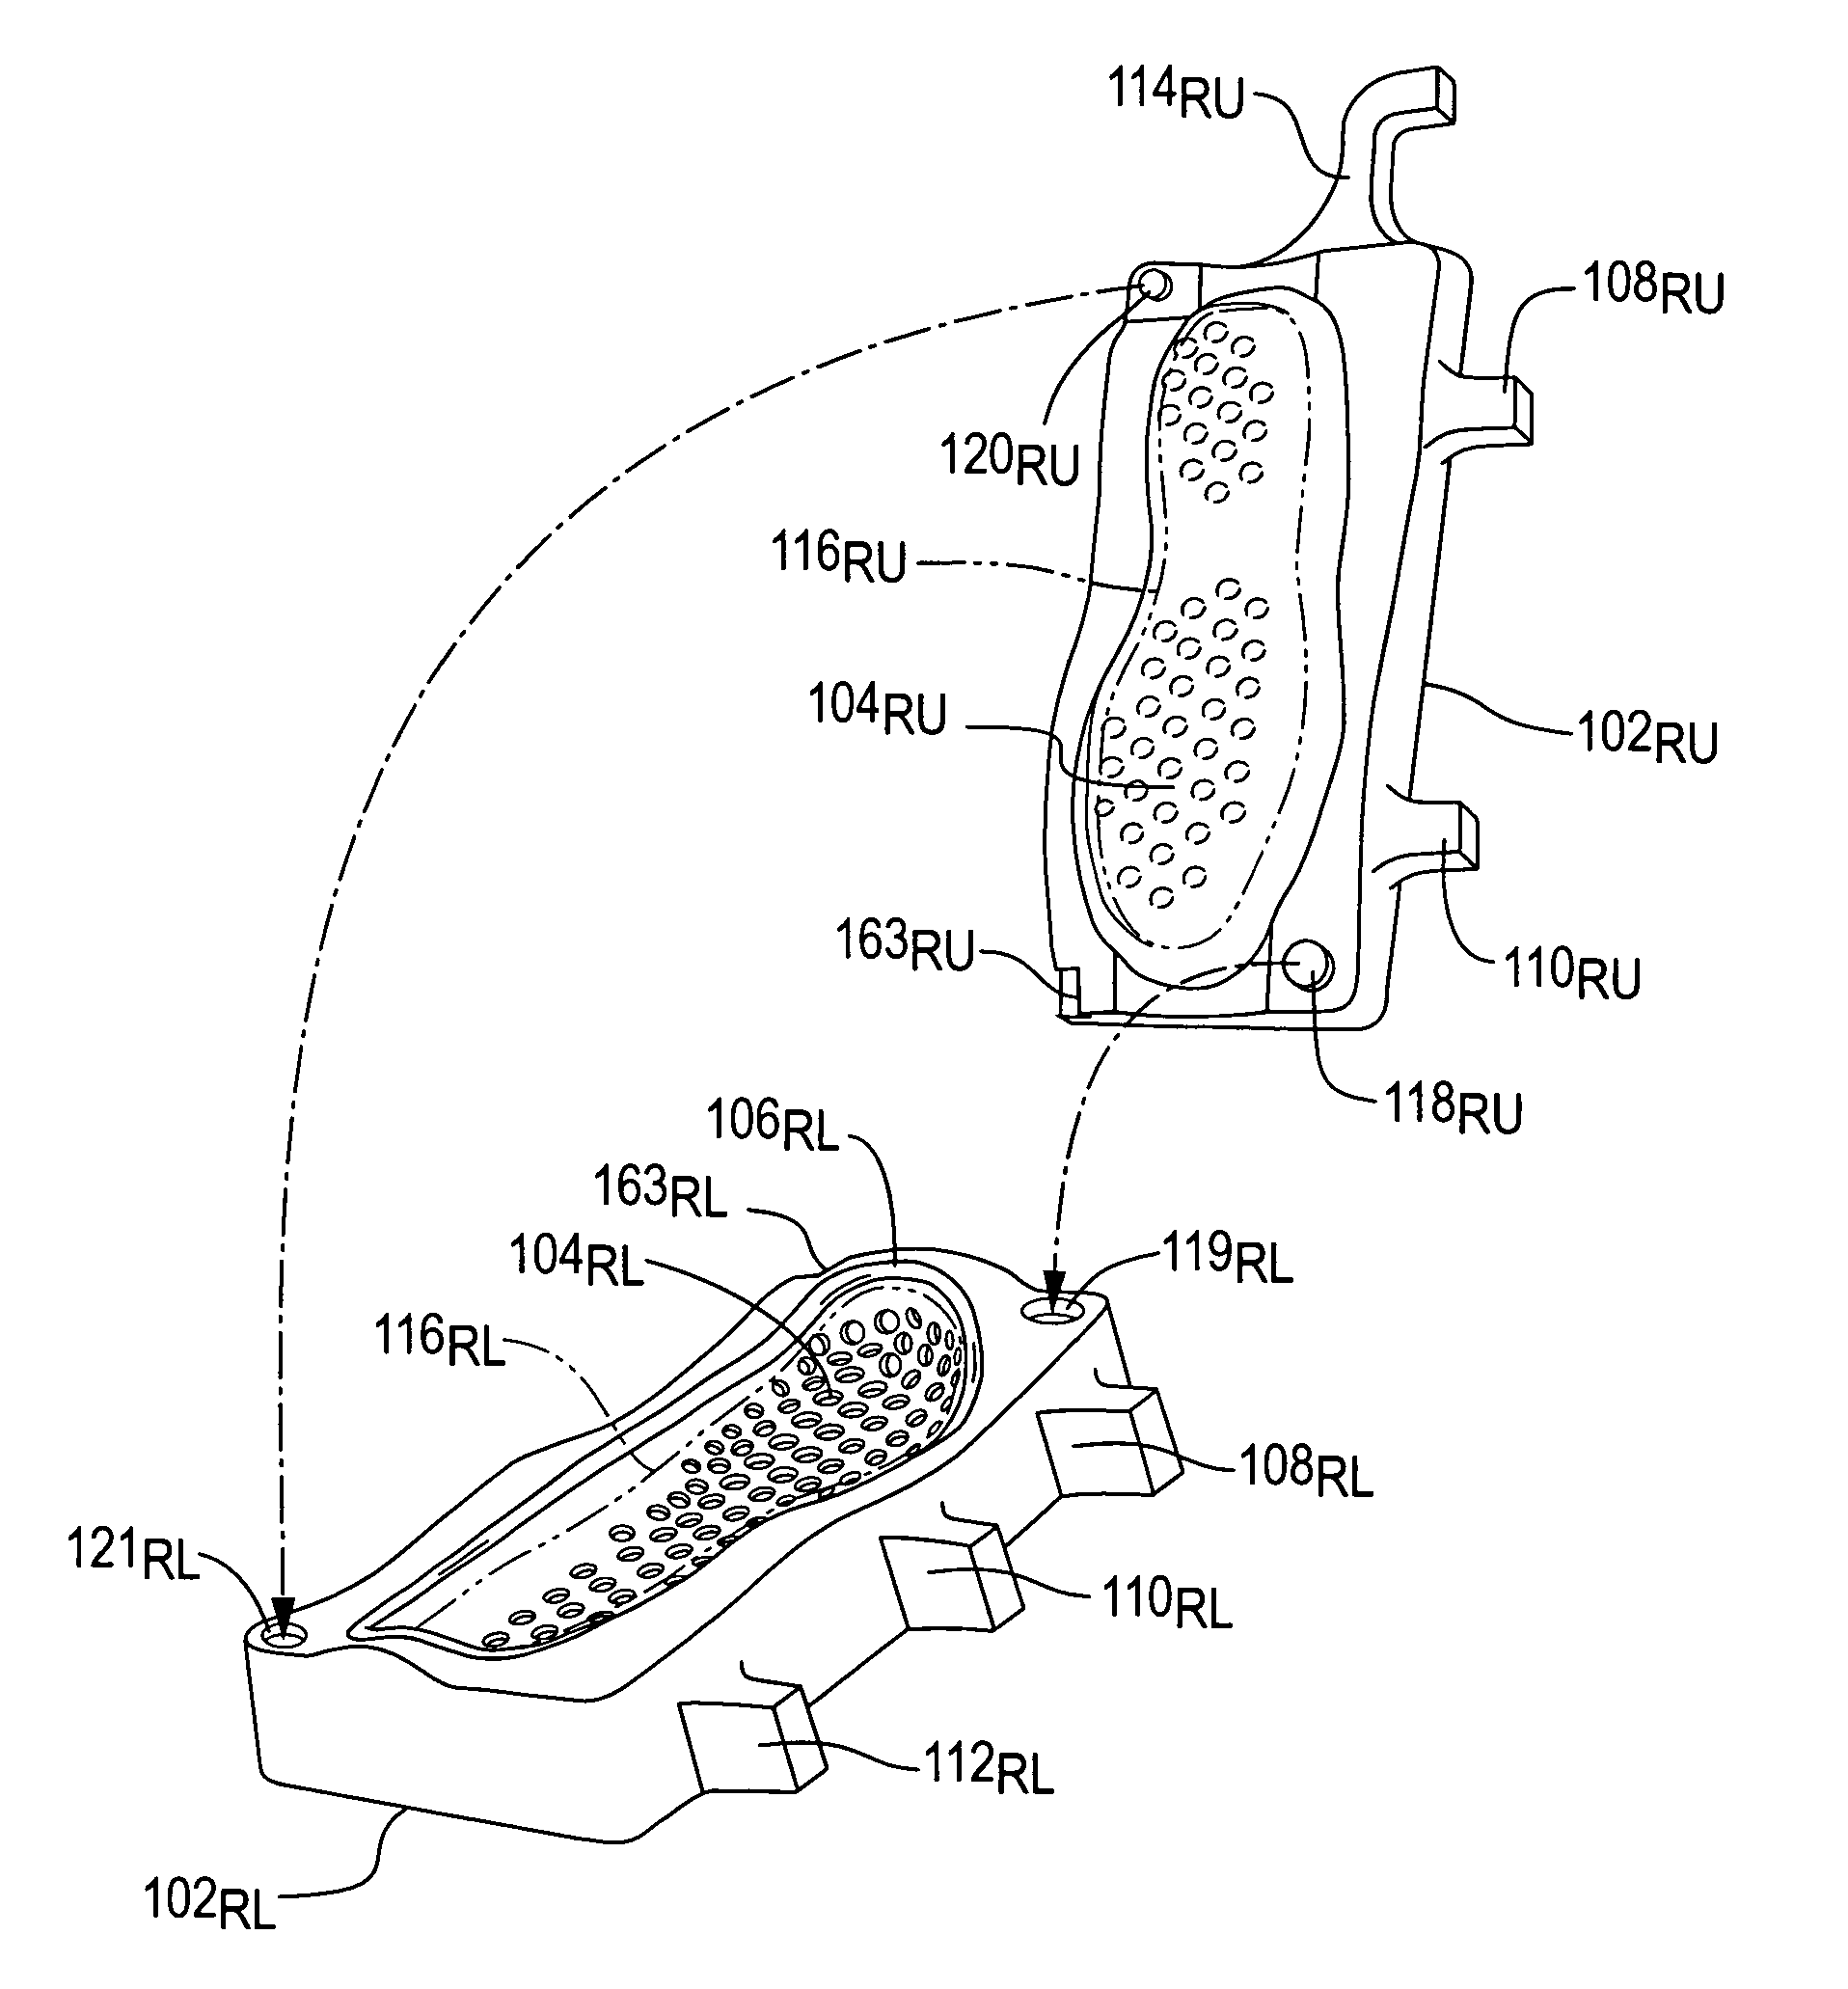 Method of making a multi-element mold assembly for, e.g., footwear components